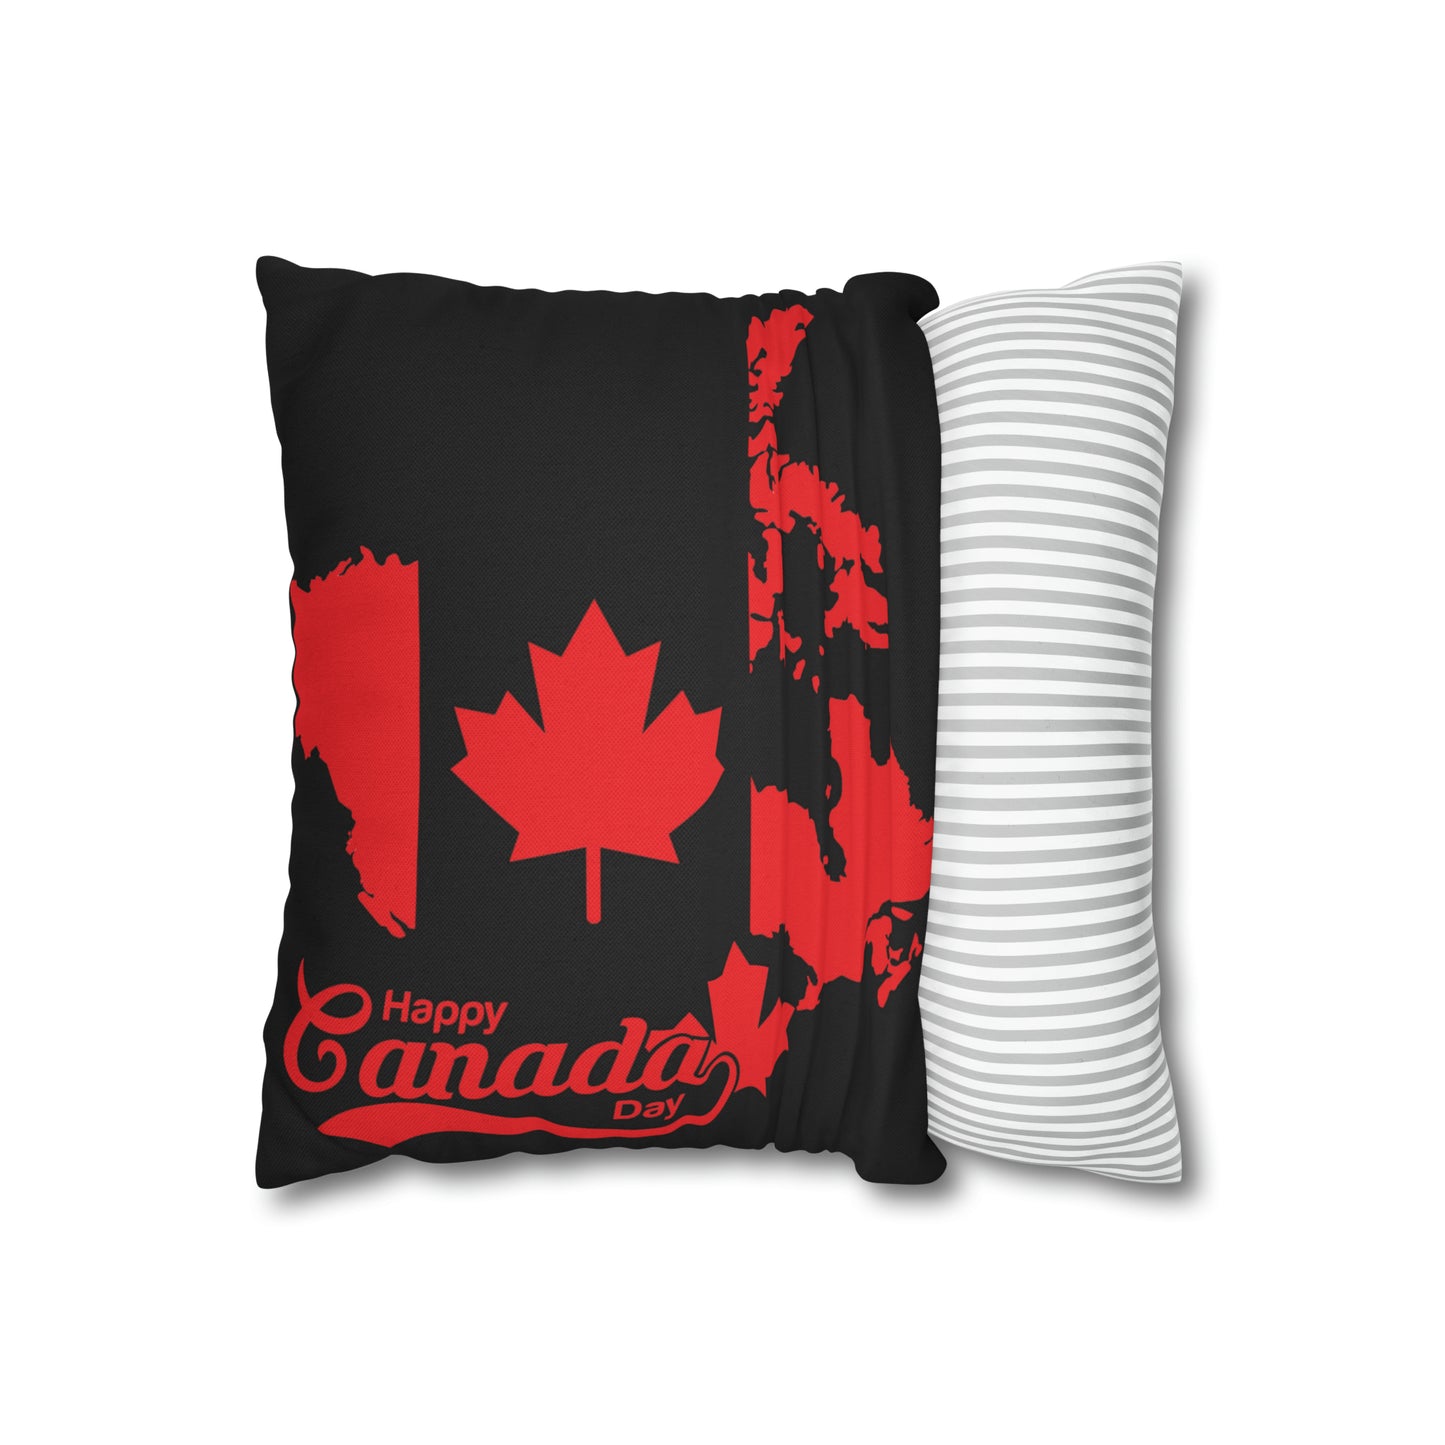 Happy Canada Day Spun Polyester Square Pillow Case